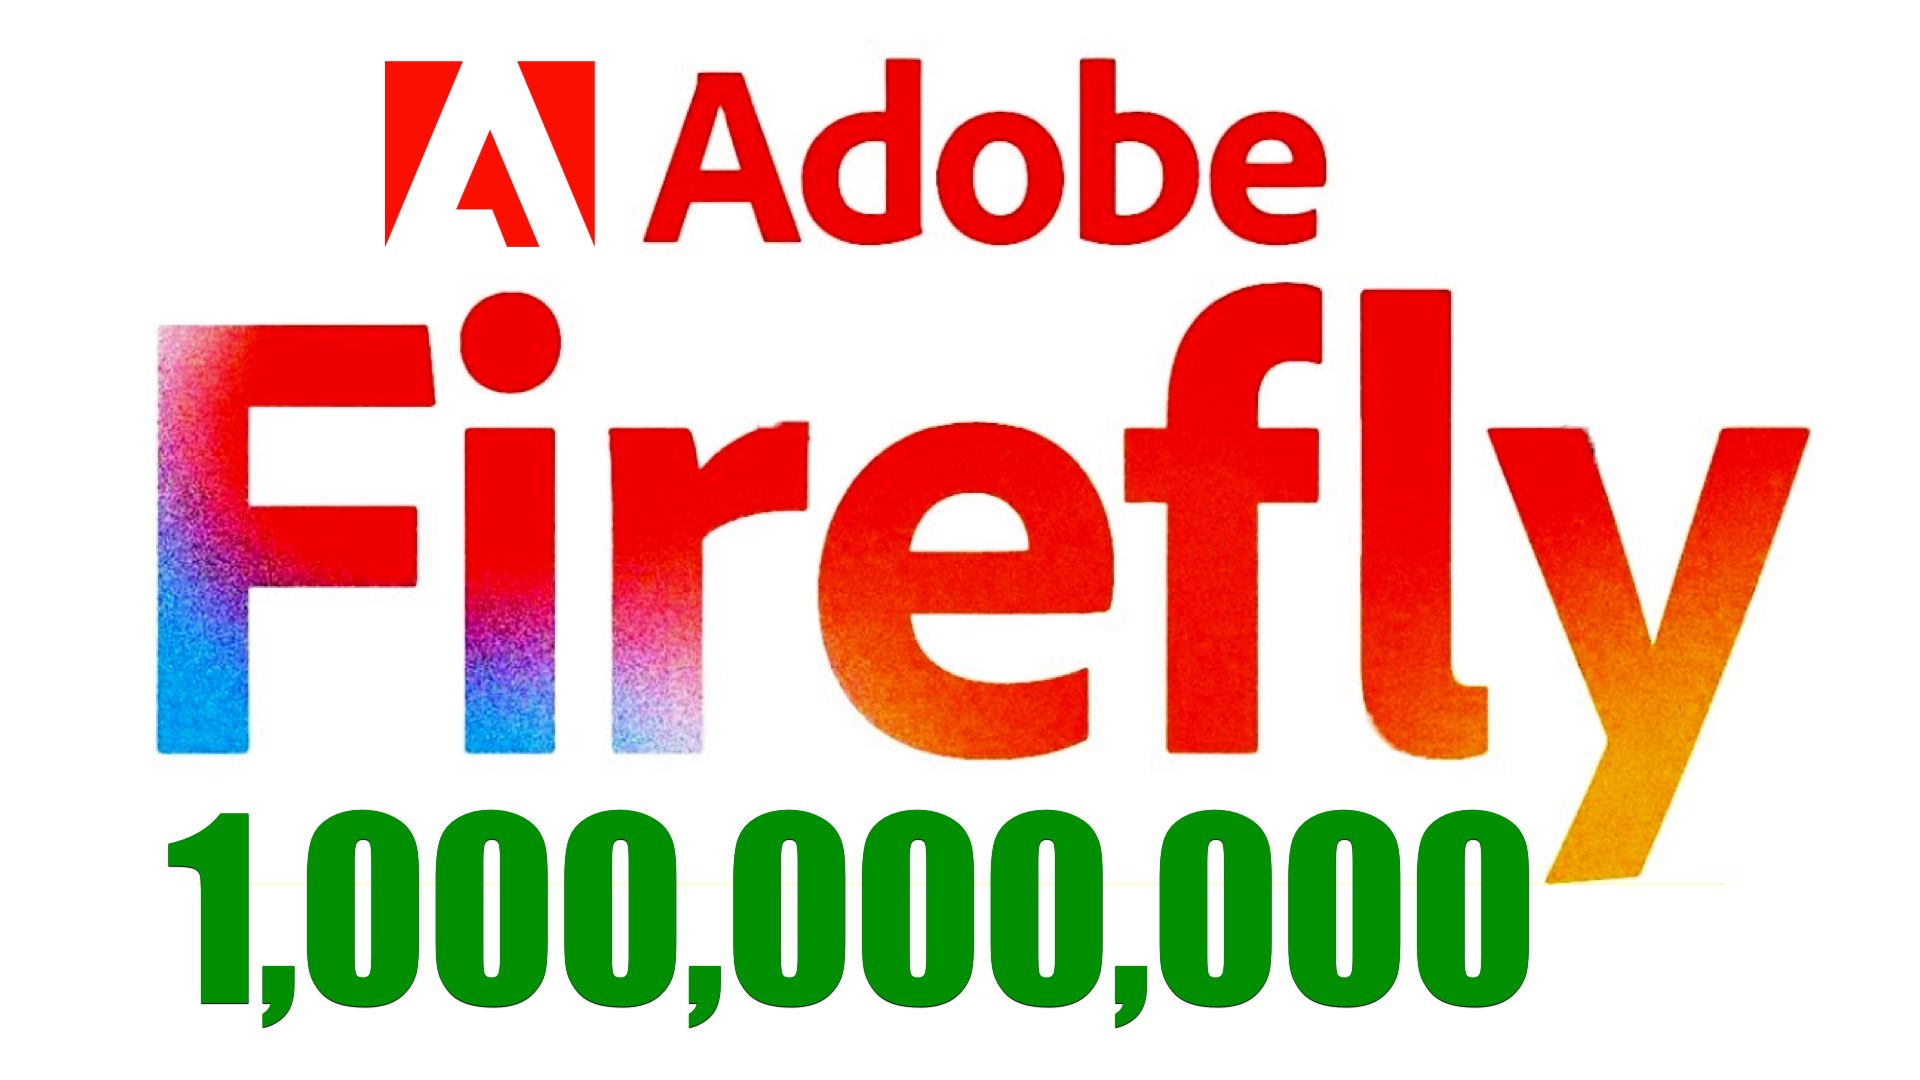 Adobe Firefly has Generated (Unfortunately) Over 1 Billion Images Since Launch